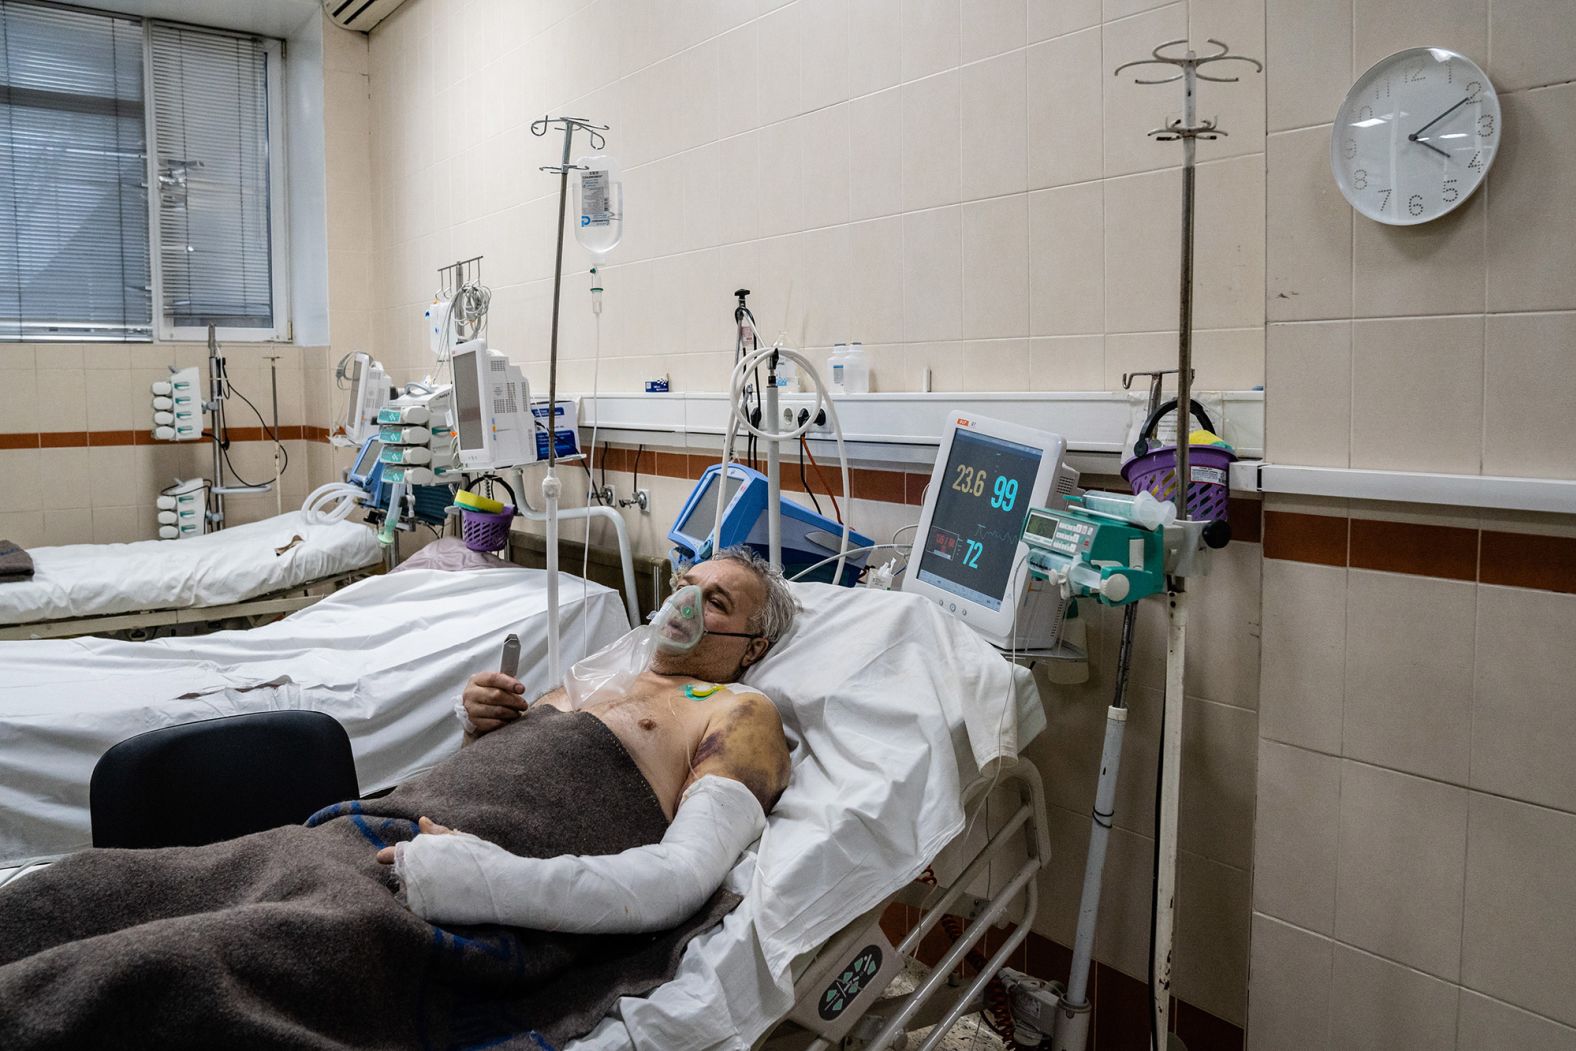 Leos Leonid recovers at a hospital in Kyiv on March 3. The 64-year-old survived being crushed when an armored vehicle drove over his car. <a href="index.php?page=&url=https%3A%2F%2Fwww.cnn.com%2Fvideos%2Fworld%2F2022%2F02%2F27%2Fbystanders-military-vehicle-ukraine-sot-vpx.cnn" target="_blank">Video of the incident</a> was widely shared on social media.